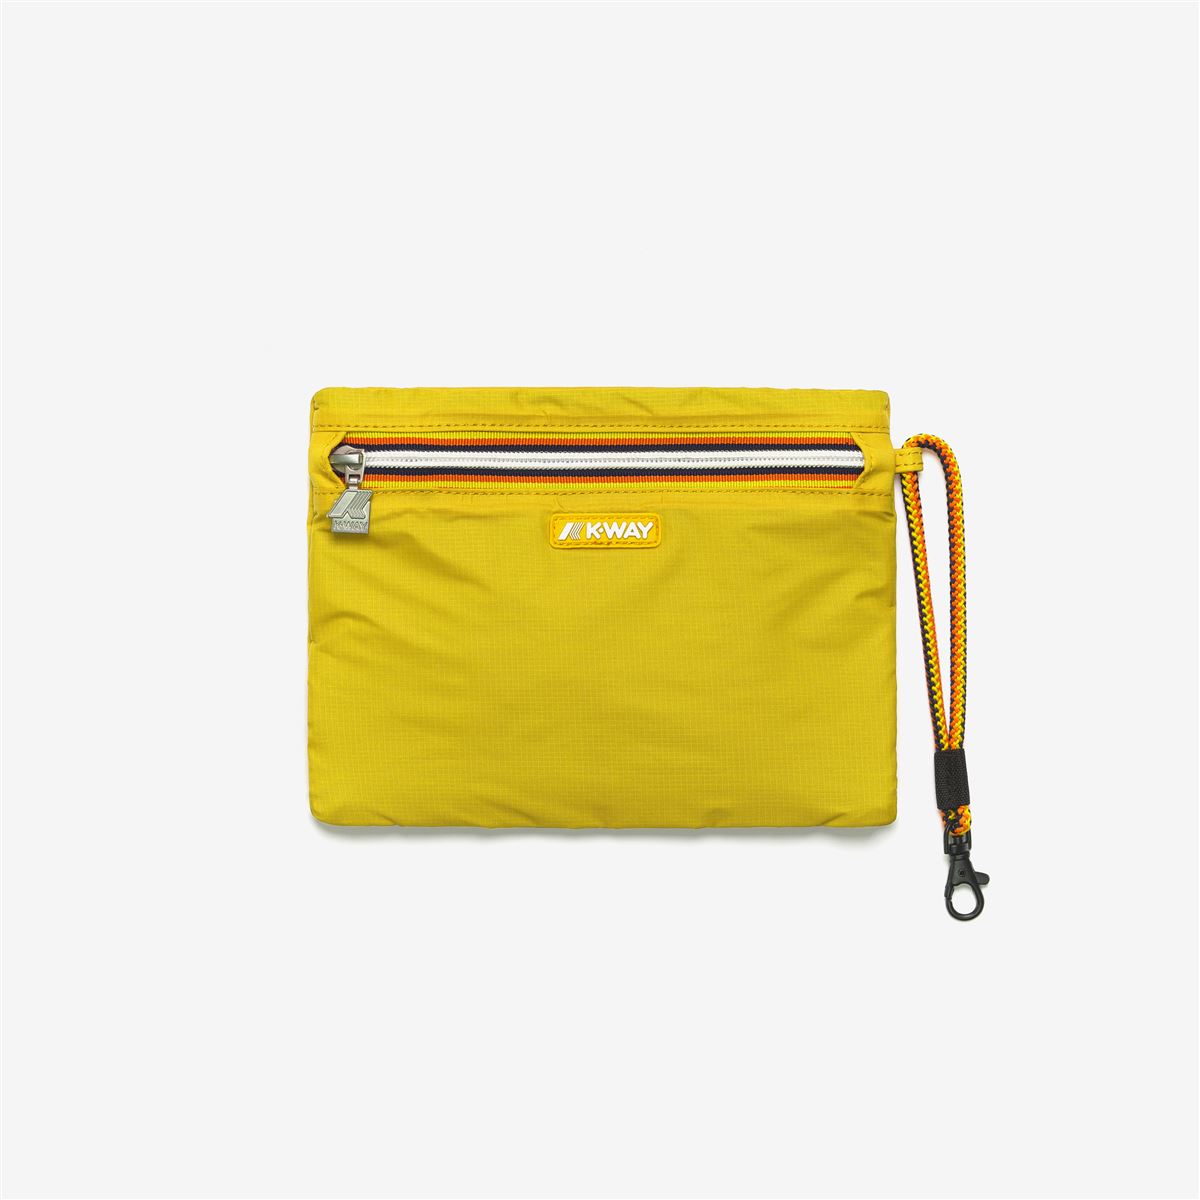 NIMES - SMALL ACCESSORIES - UNISEX - YELLOW DK